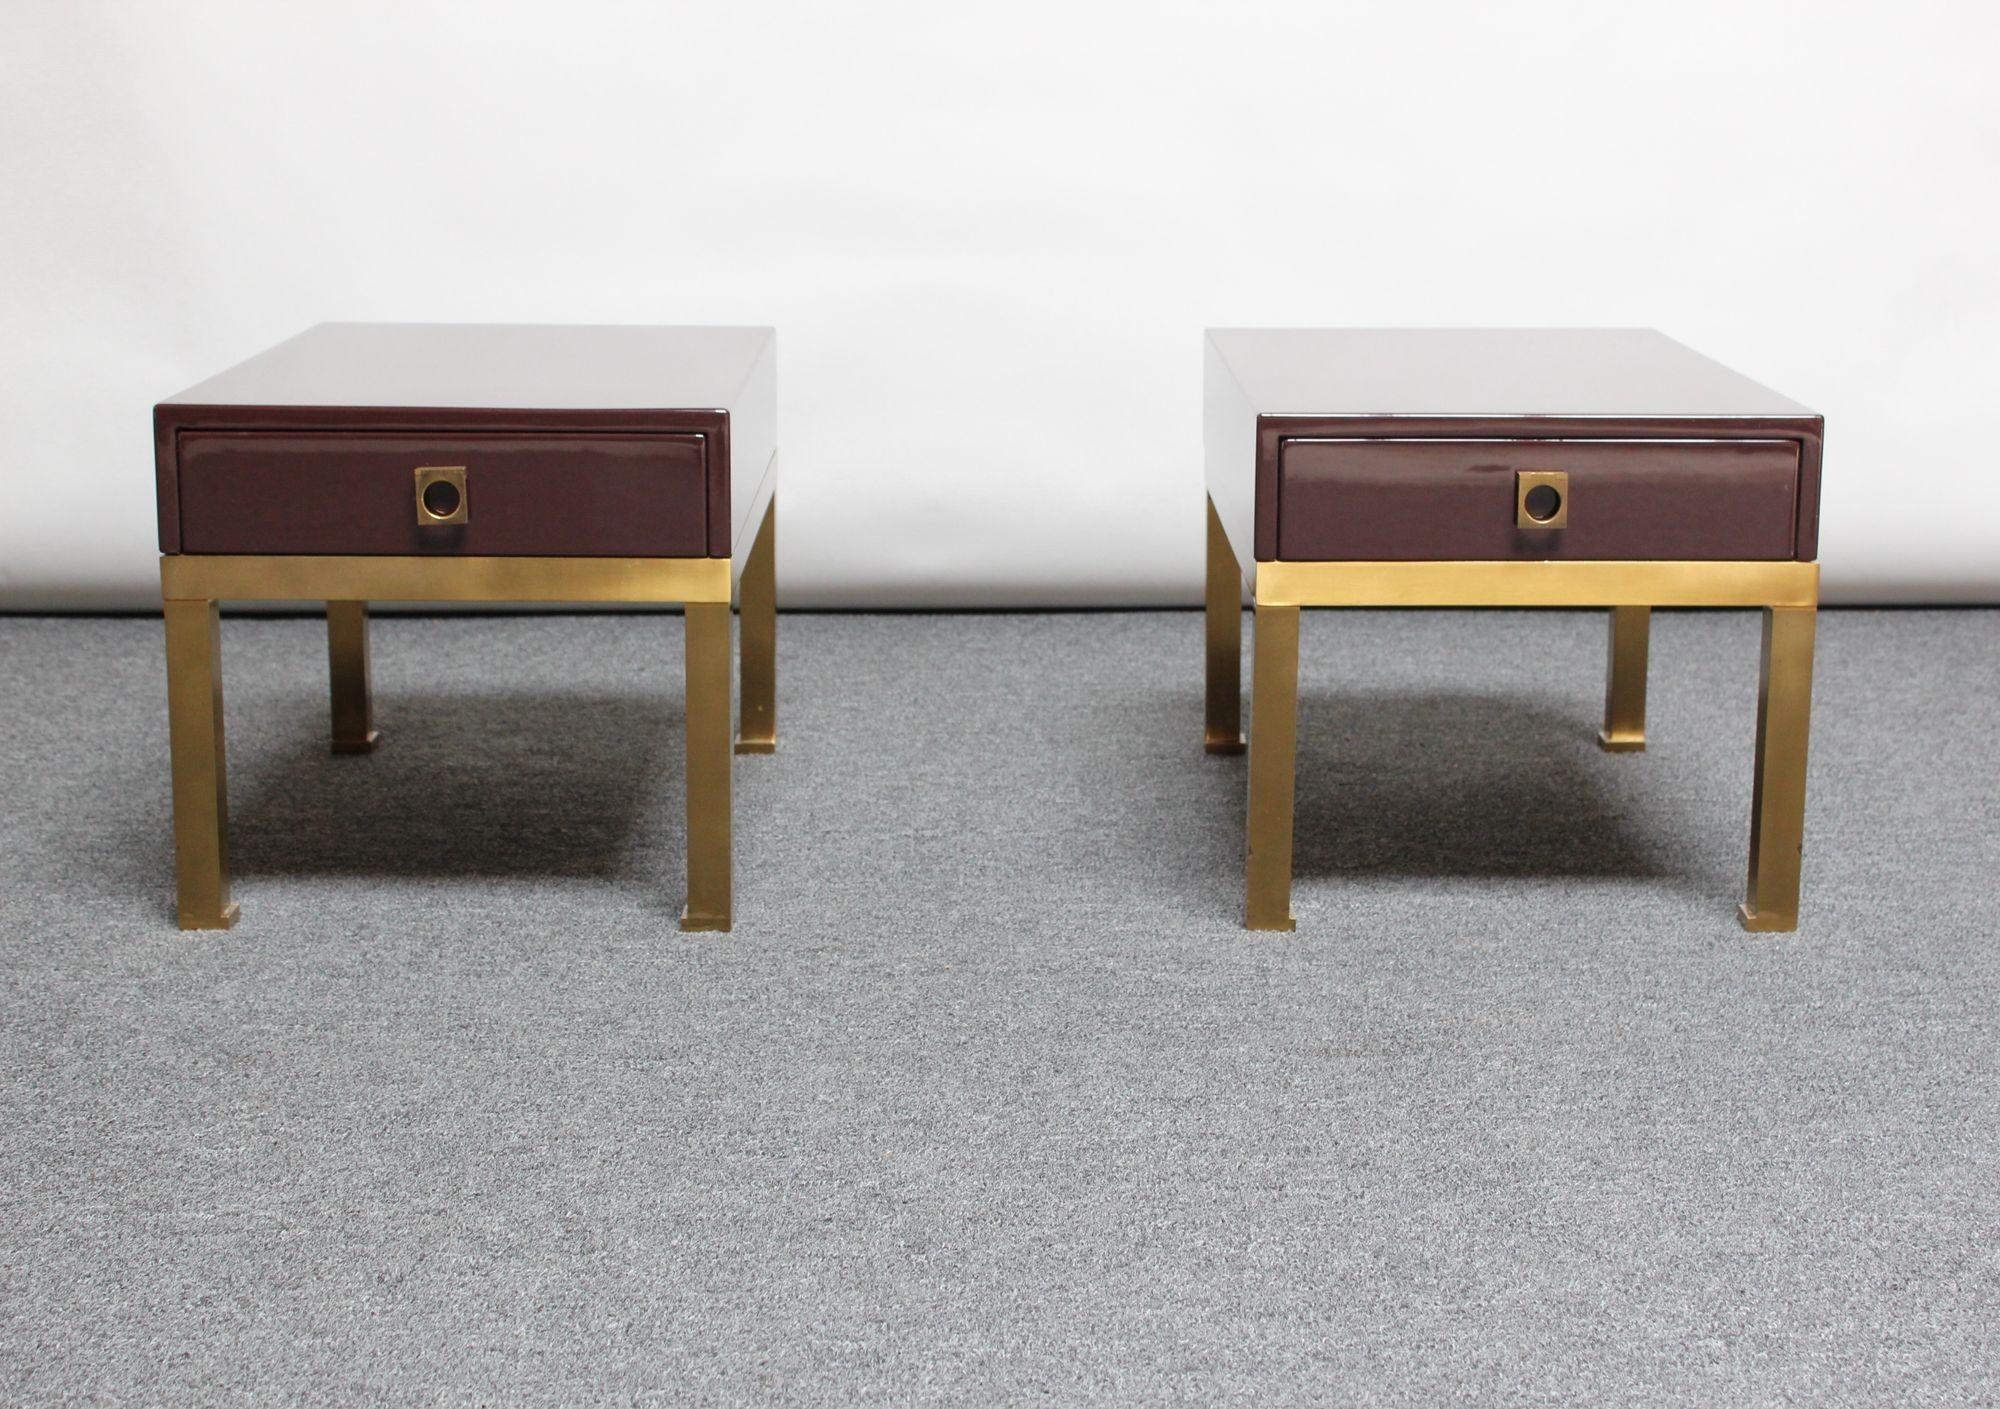 Exquisite, low side tables/nightstands designed by Guy Lefèvre for Maison Jansen (ca. 1975, France). Composed of lacquered mahogany chests supported by brass cradles. Single drawers smoothly slide open via modernist, sculptural, brass pulls.